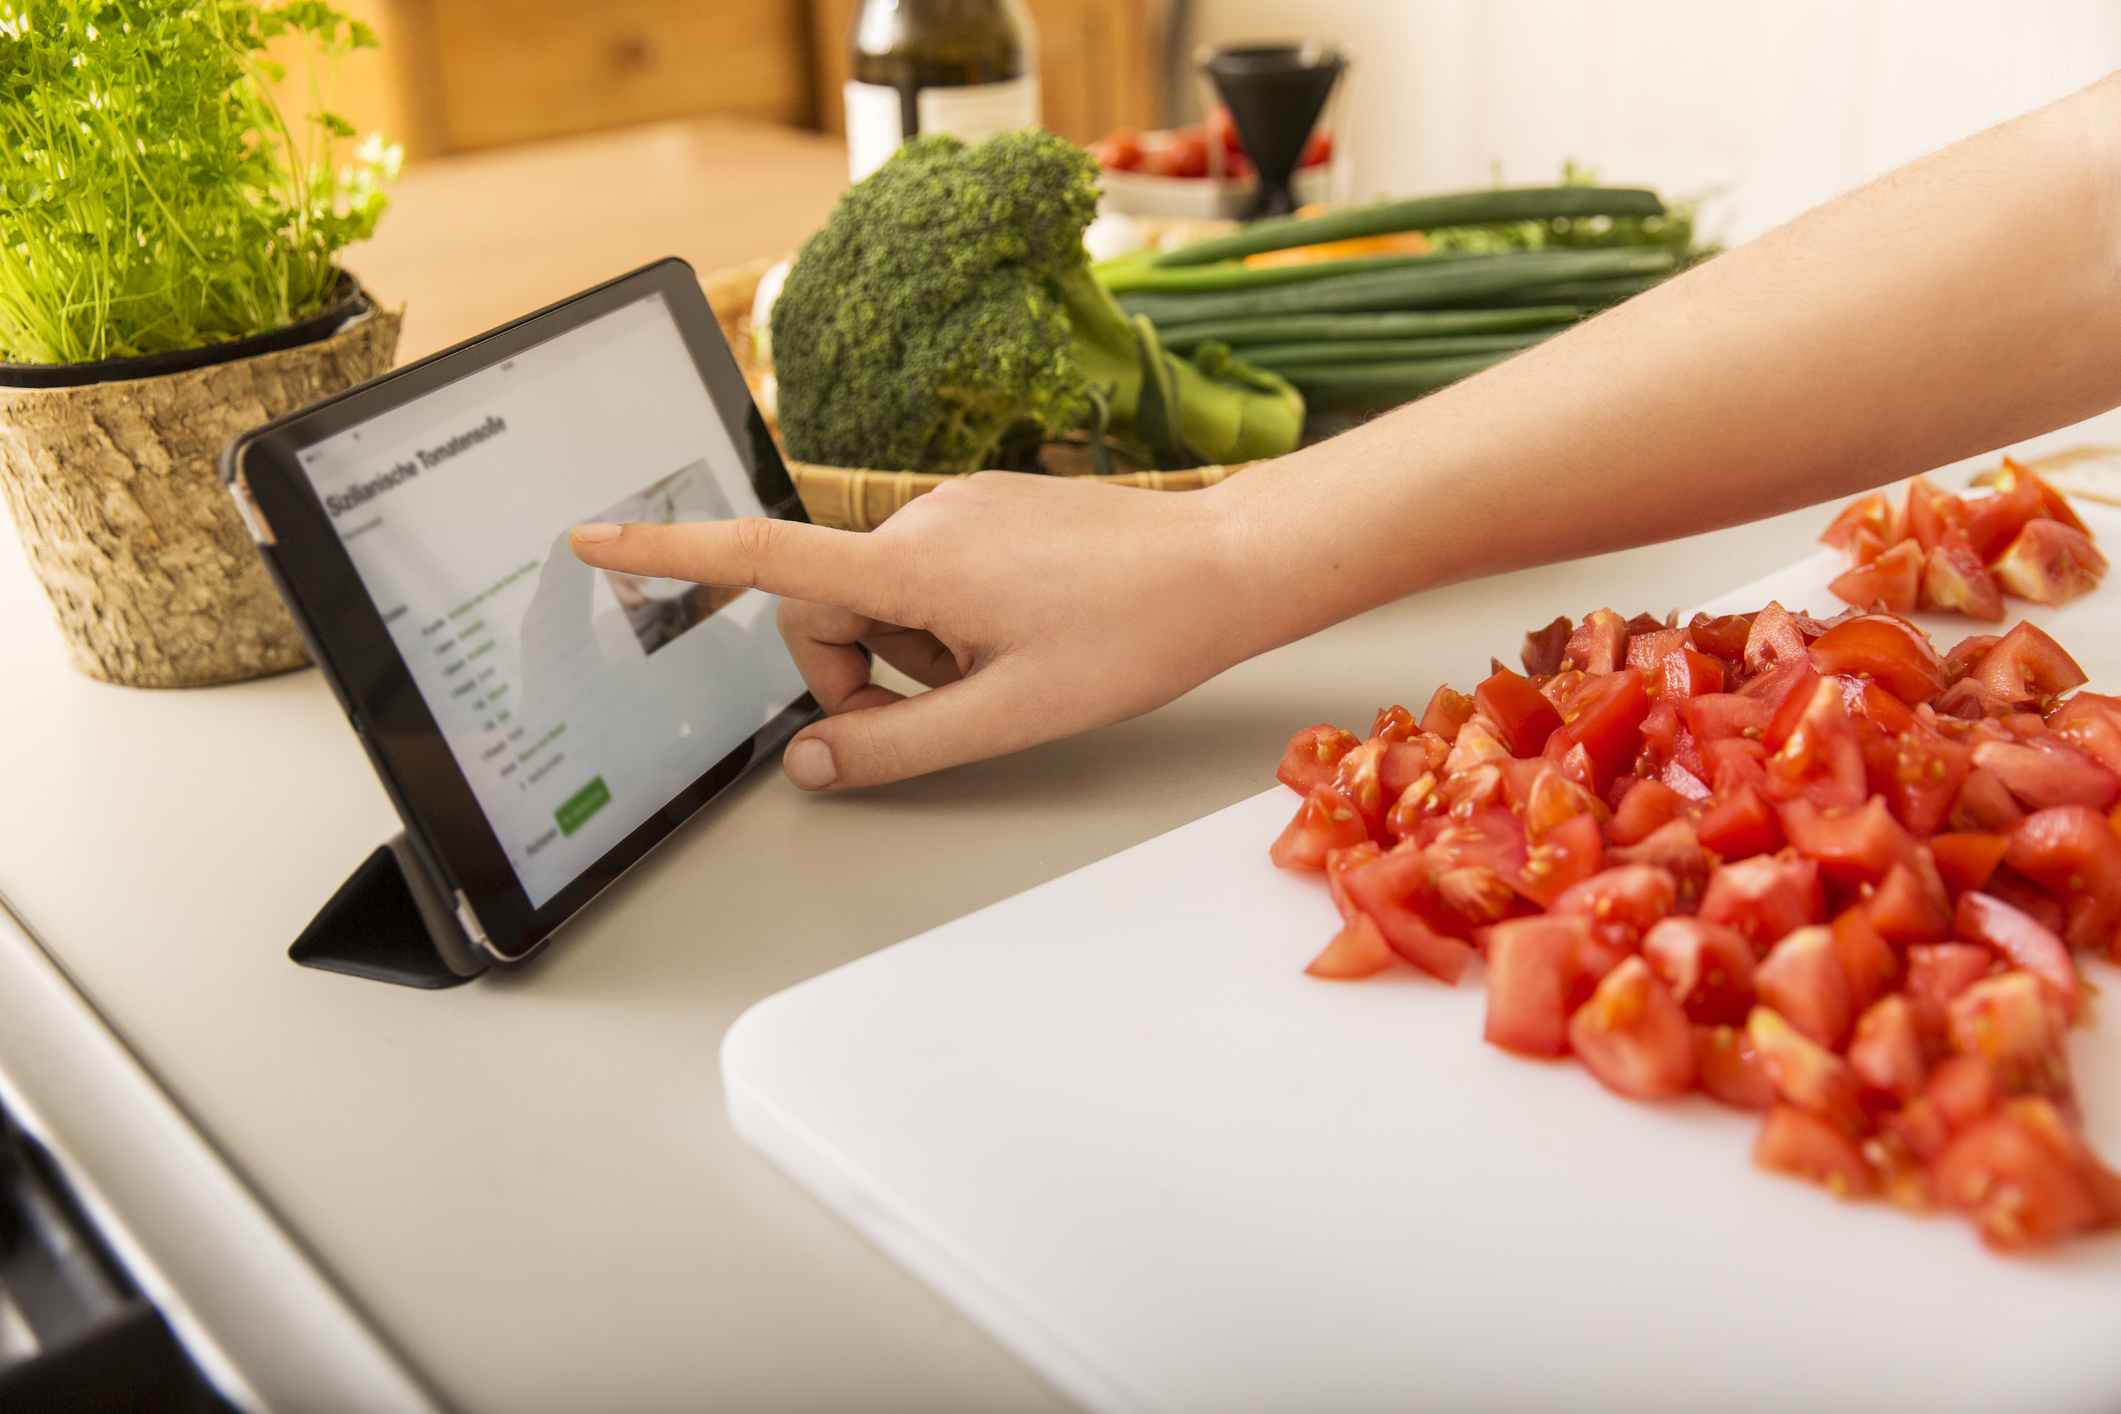 Person using a tablet with a recipe on screen while chopping tomatoes on a cutting board